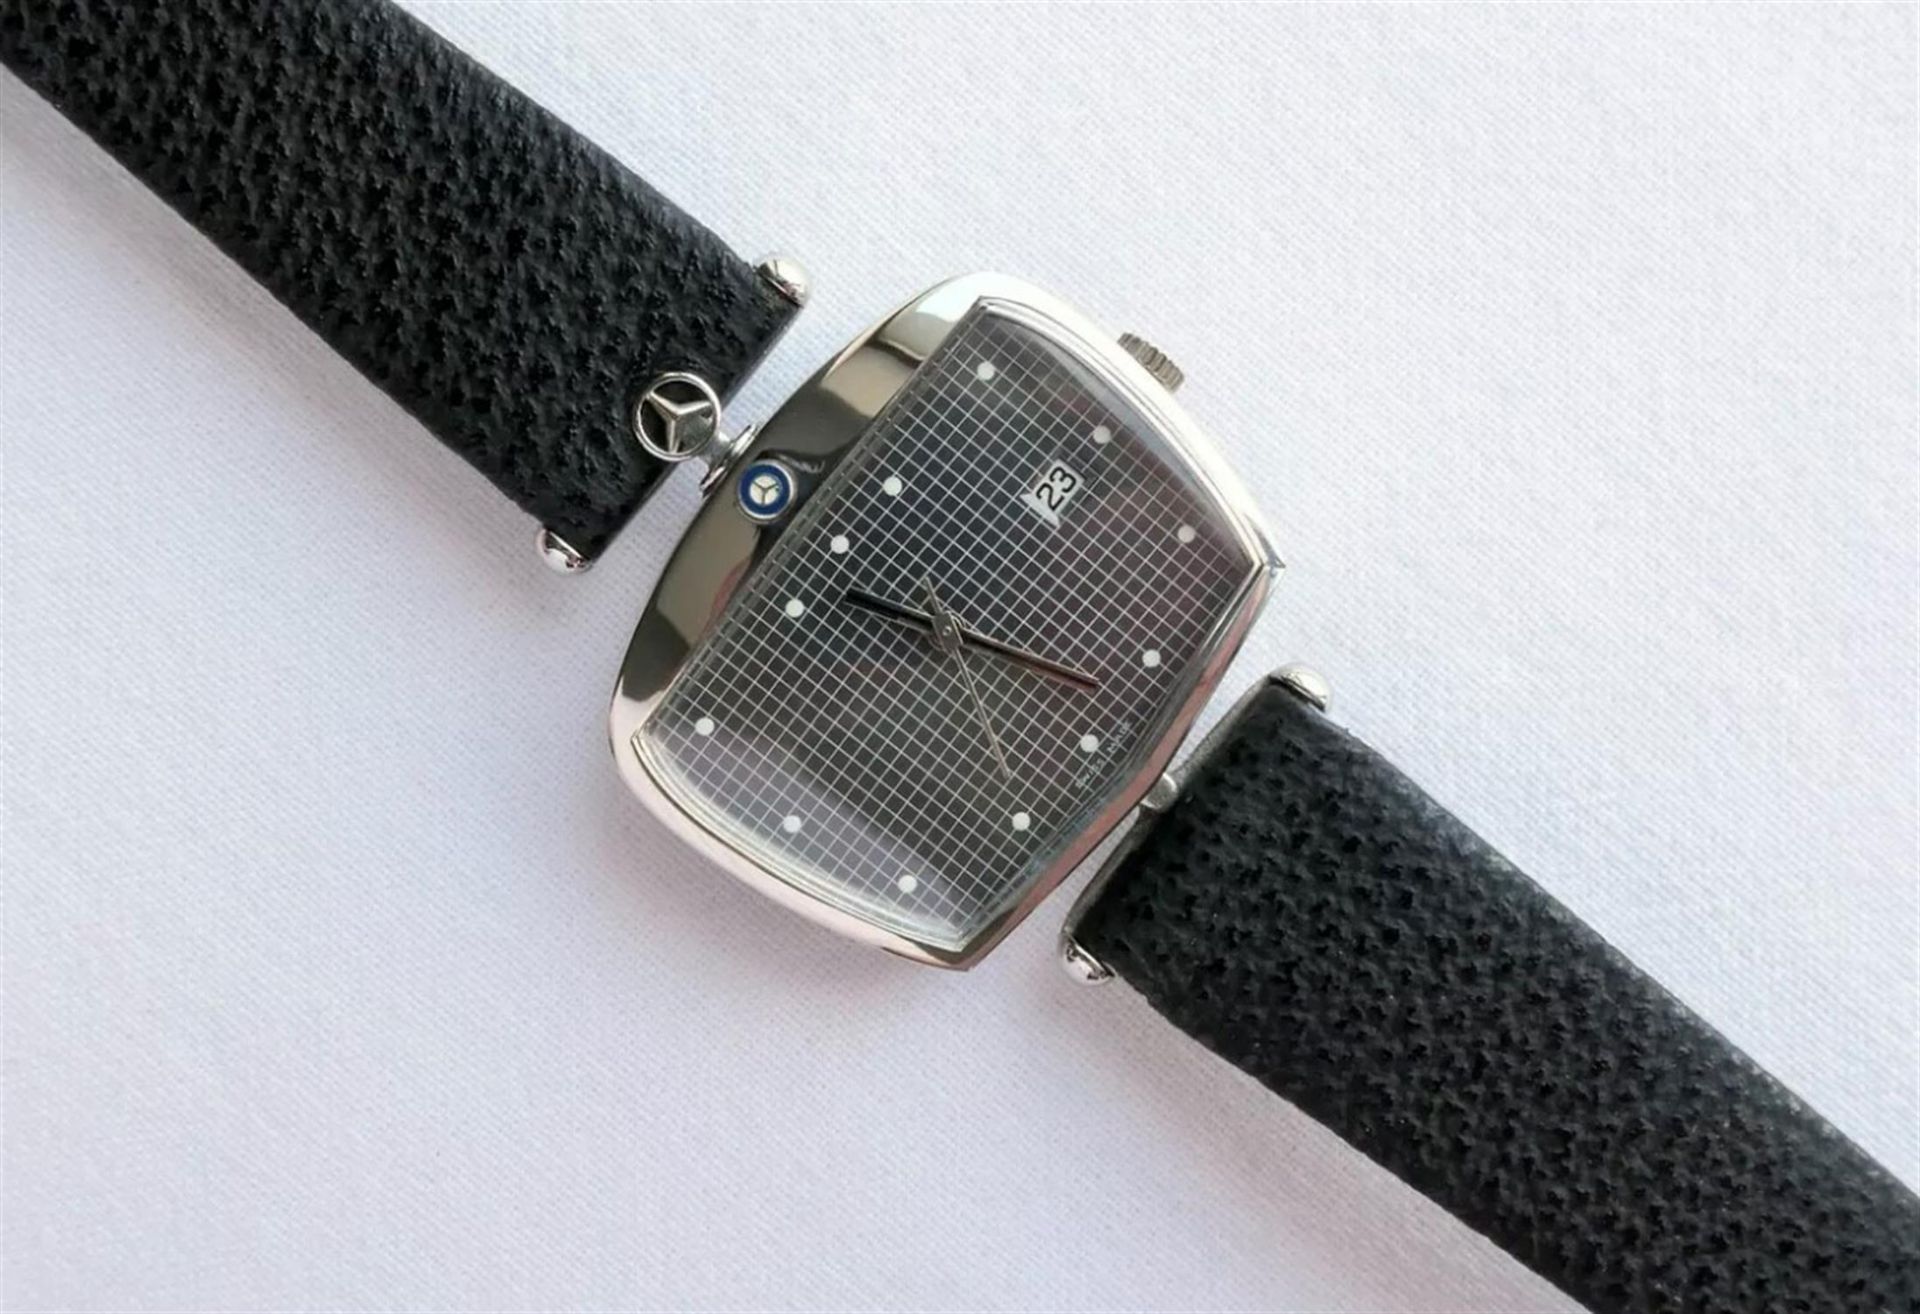 A Rare Mercedes-Benz 'Grille-Head' New Old Stock Wristwatch Evocative of the Famous German Marque - Image 6 of 10